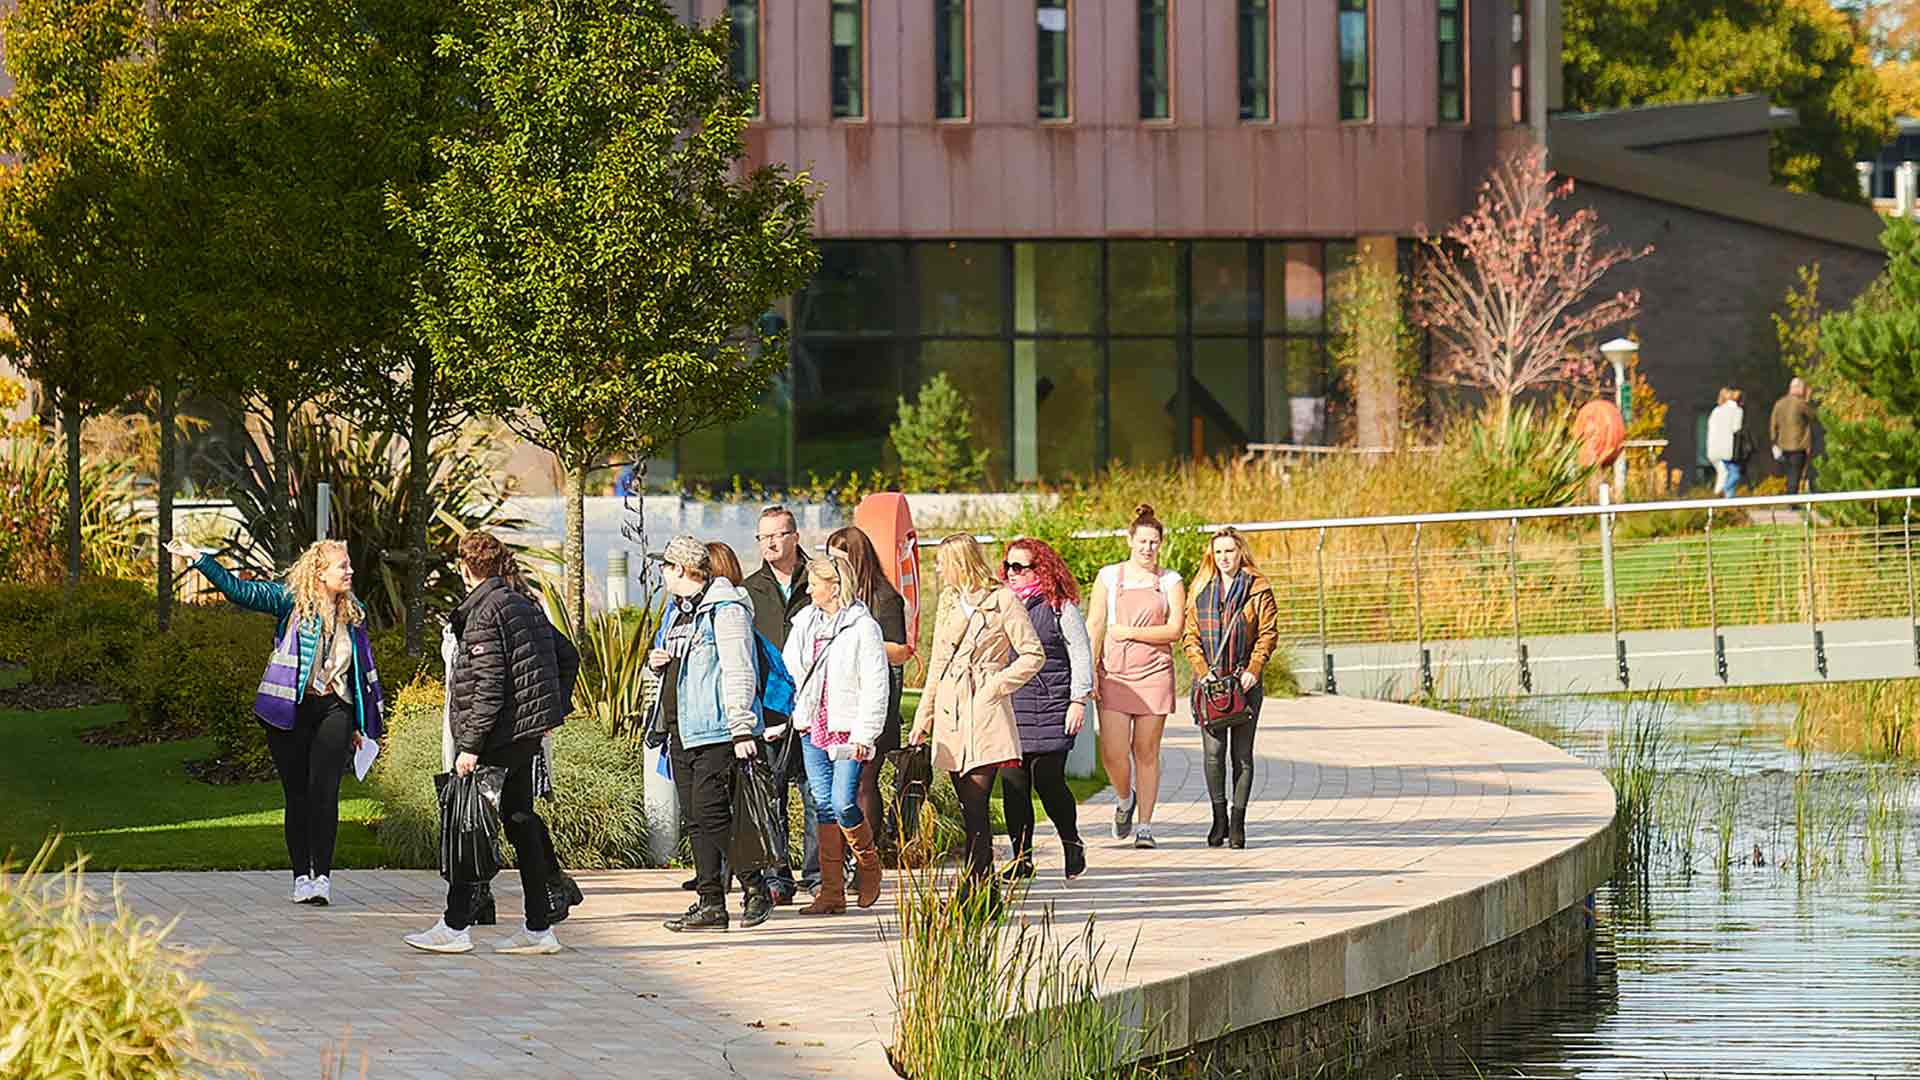 A student guide leads a group of prospective students and their family members on a tour of the campus, seen here near the Catalyst building during an Edge Hill University open day.